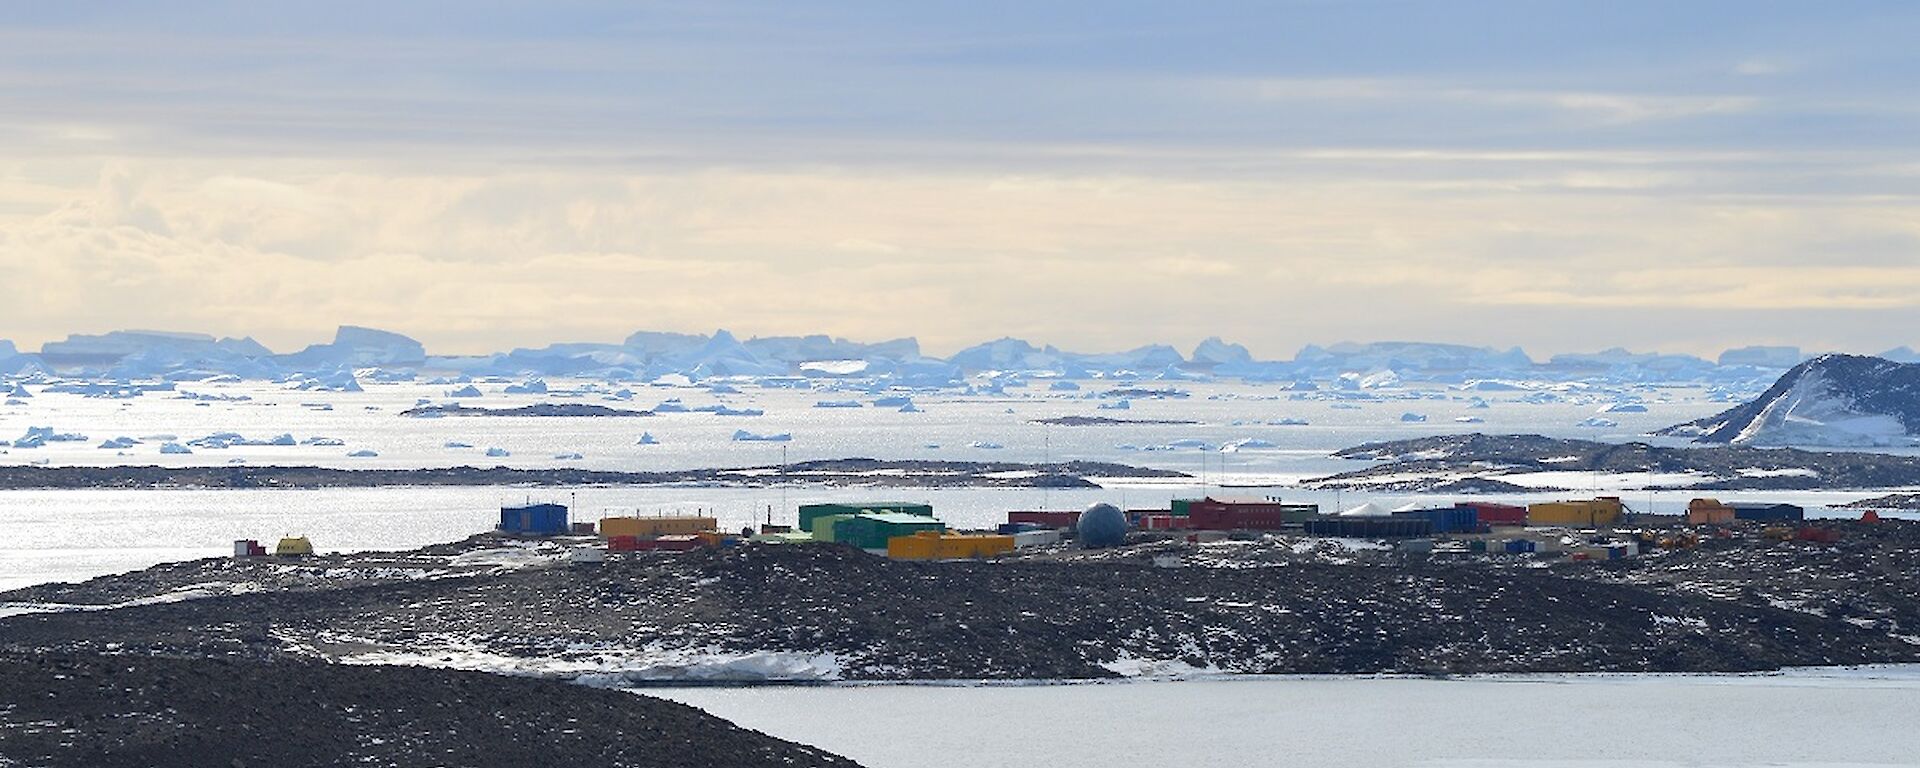 A view from the top of The Lookout. There are brown hills amongst the ice, with colourful buildings in the distance. Behind the station are icebergs on the horizon.